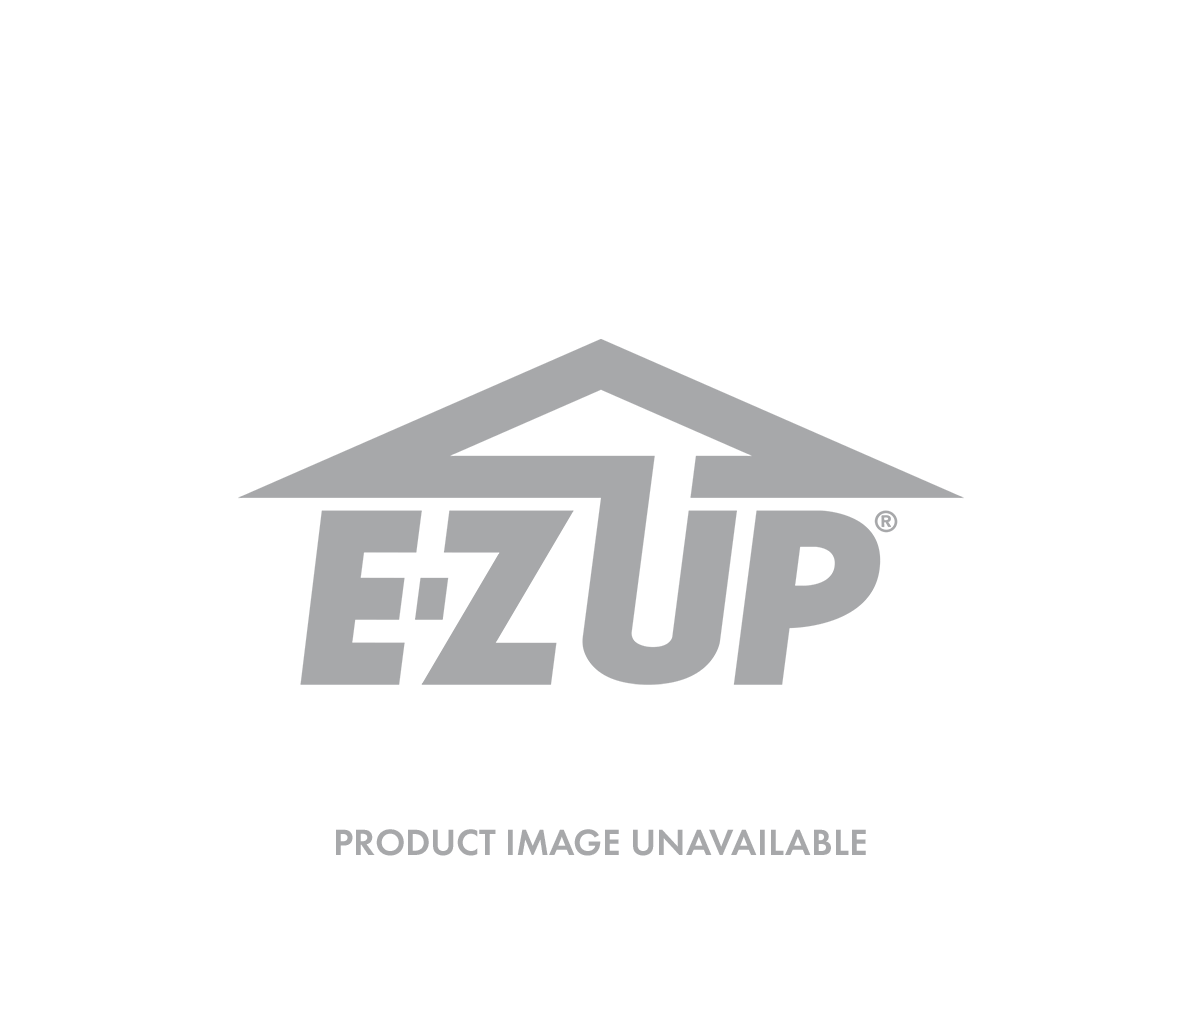 EZ-UP FASTTRAX Outdoor GUTTER CLIPS for Christmas Light Set NEW LOT of 48 Clips 